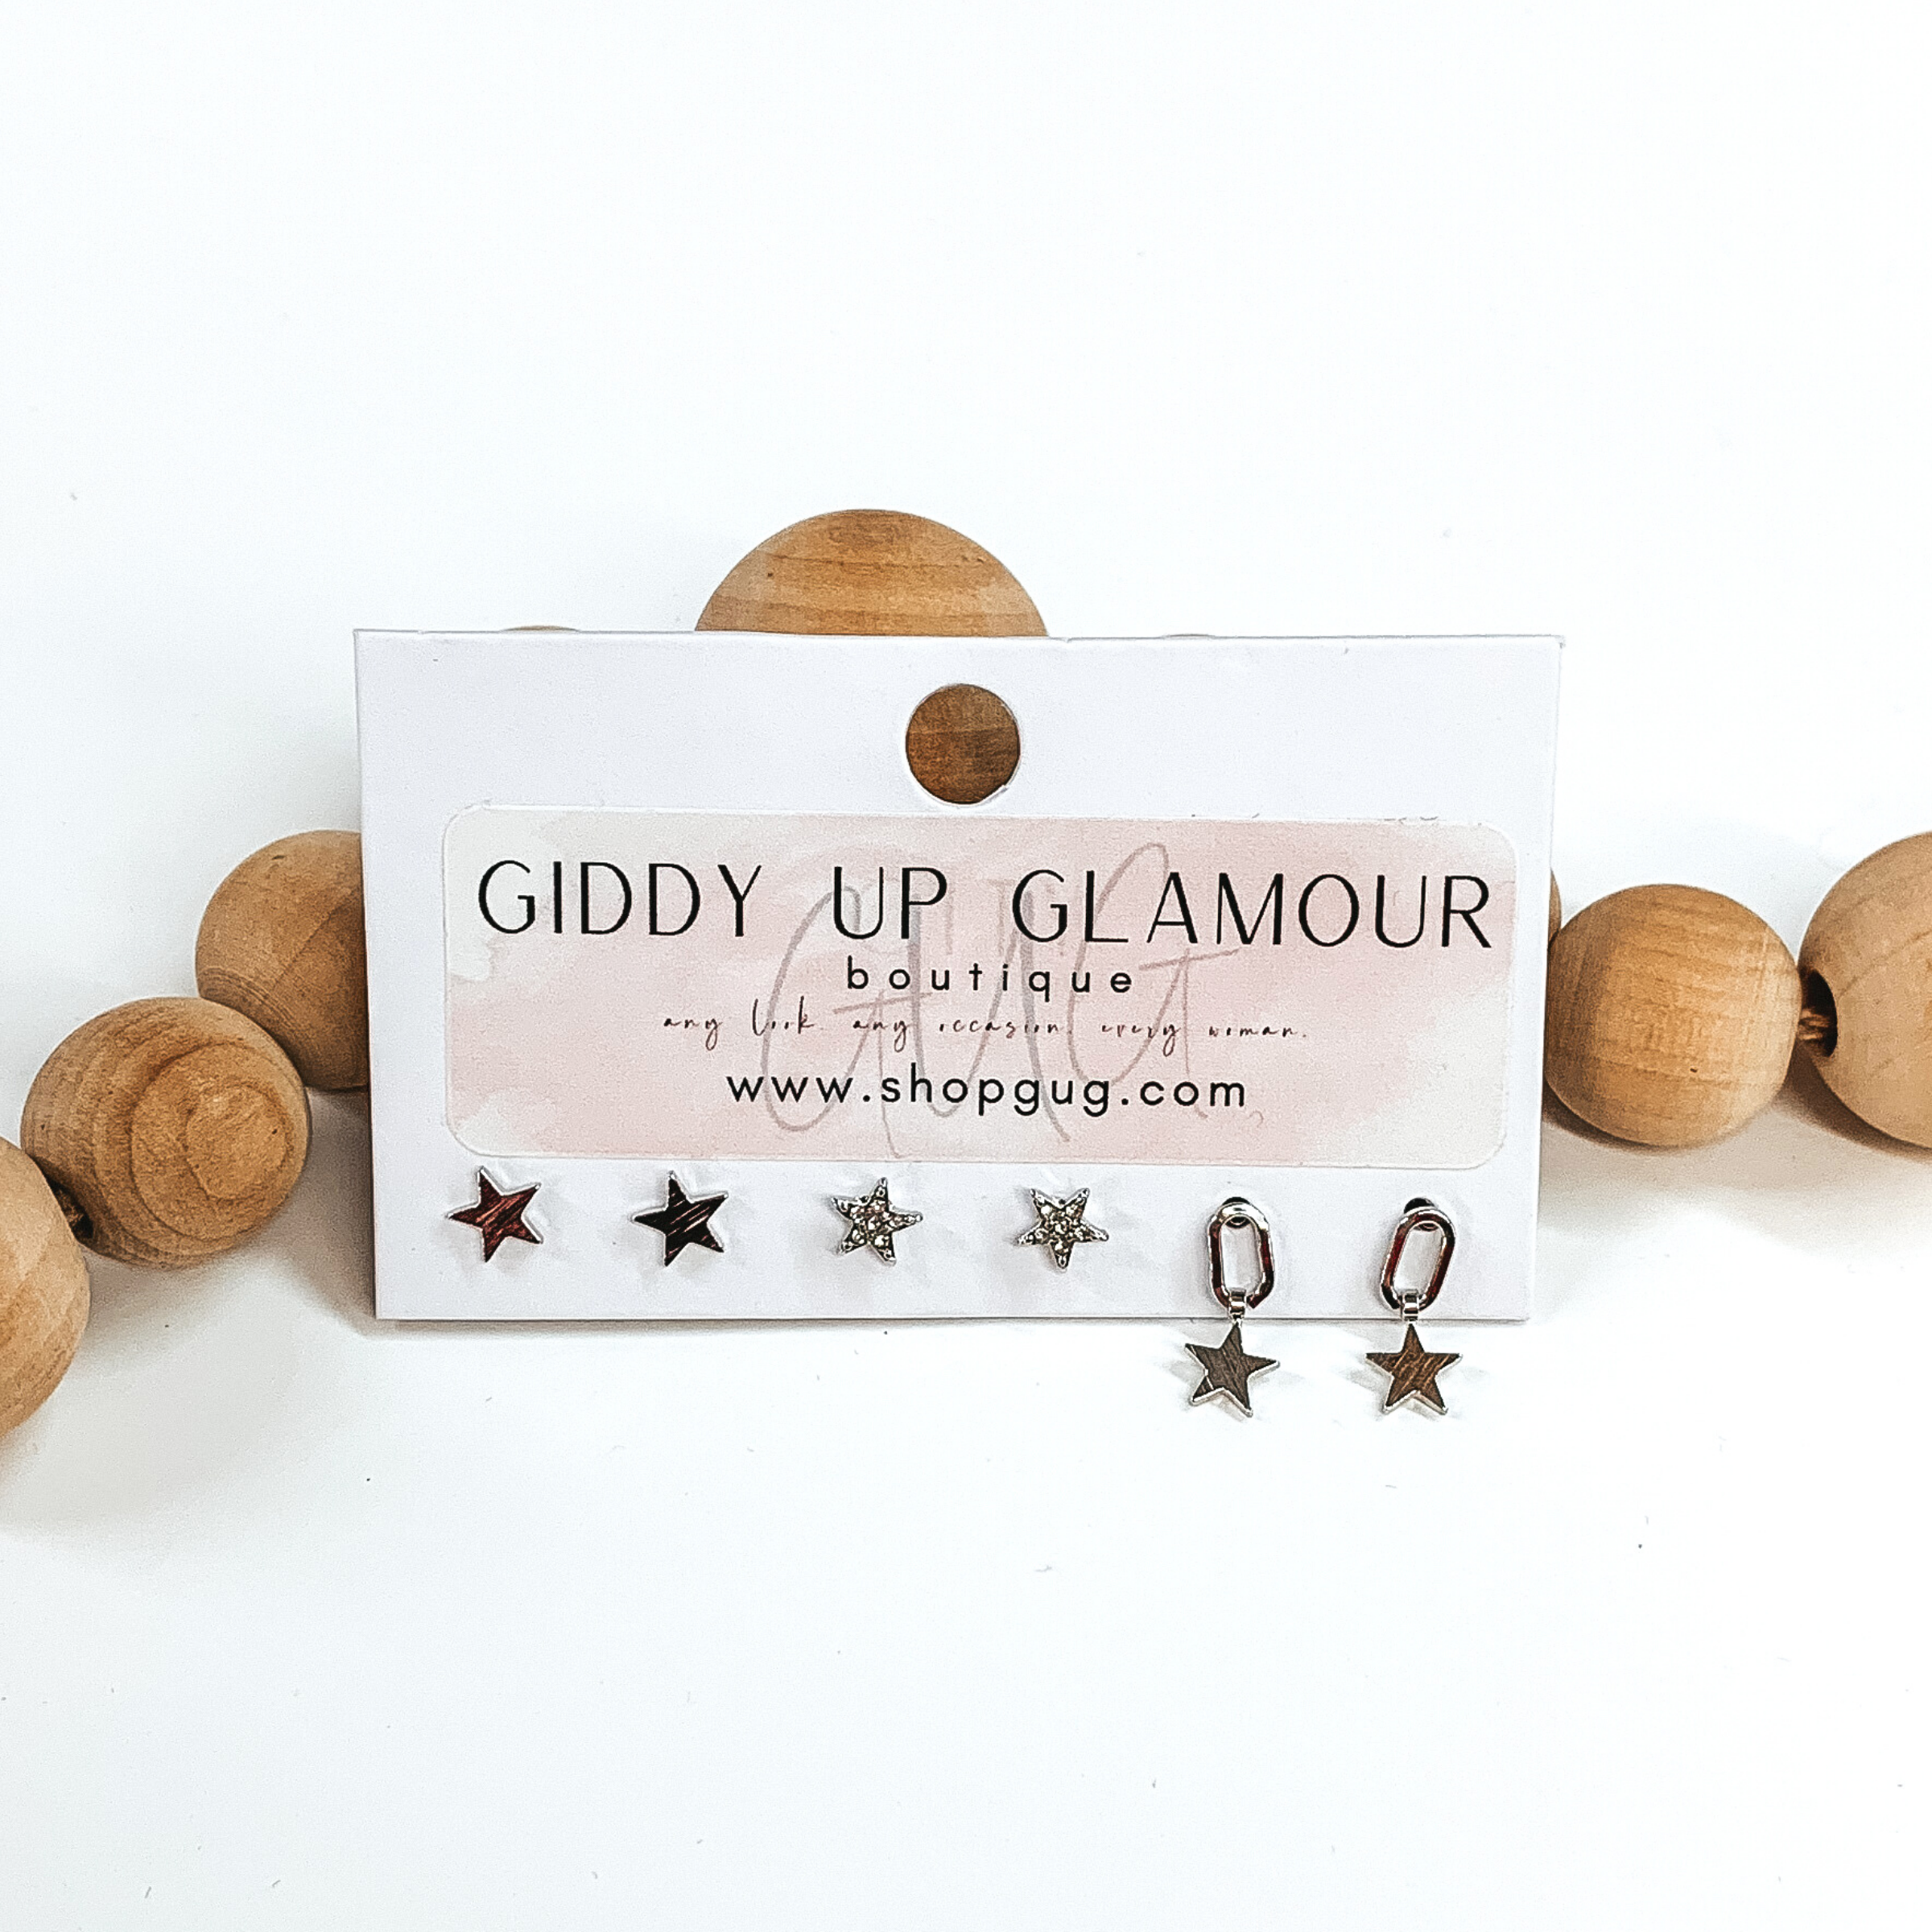 This is a 3 piece silver earring set. There are two sets of silver stud earrings; one is plain and the other has clear crystals. The last earrings is an open oval with a hanging star charm. These earrings are pictured on a Giddy Up Glamour earring holder laying in front of tan beads on a white background